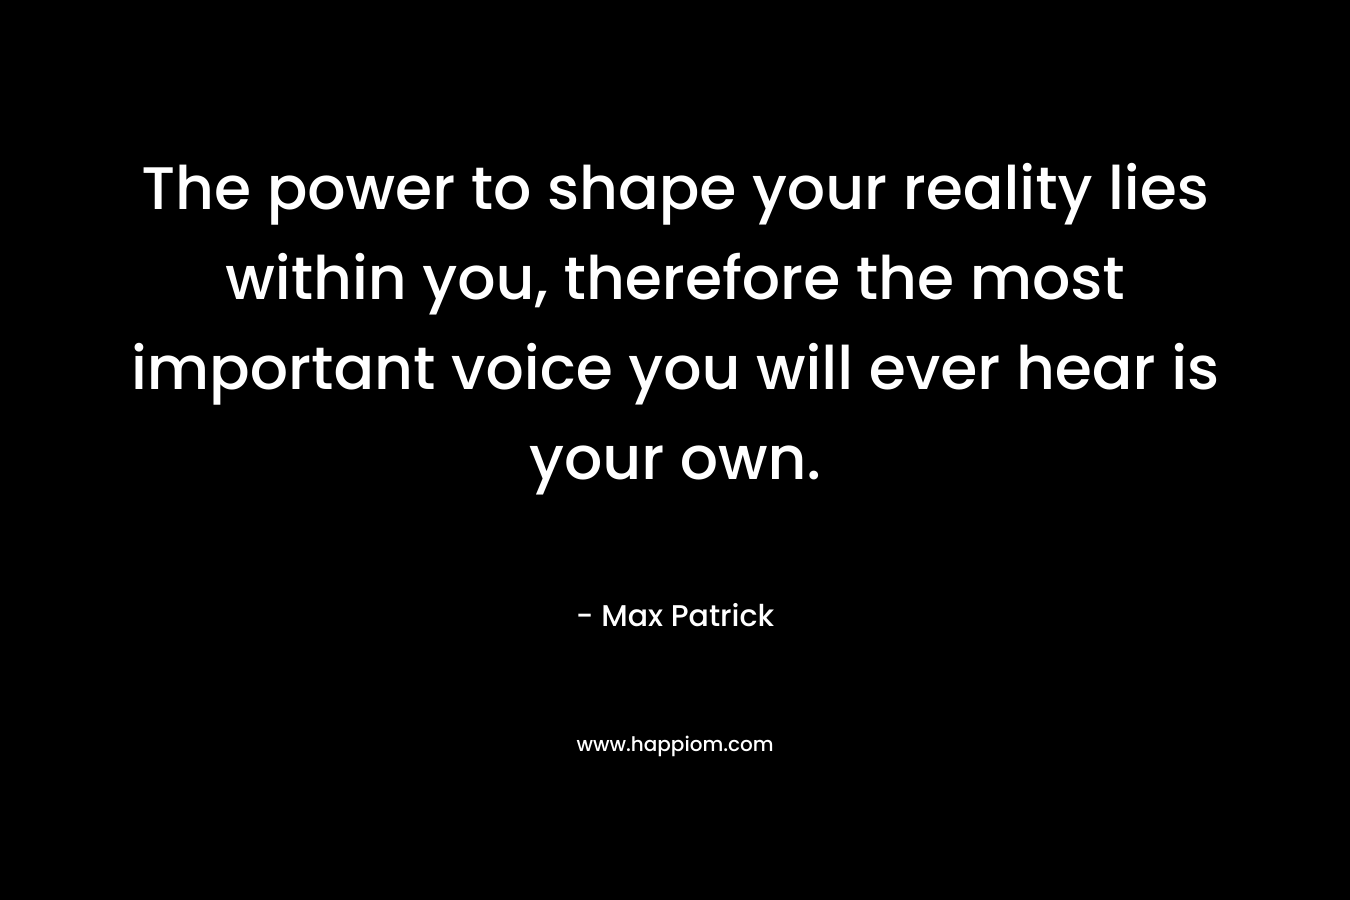 The power to shape your reality lies within you, therefore the most important voice you will ever hear is your own.